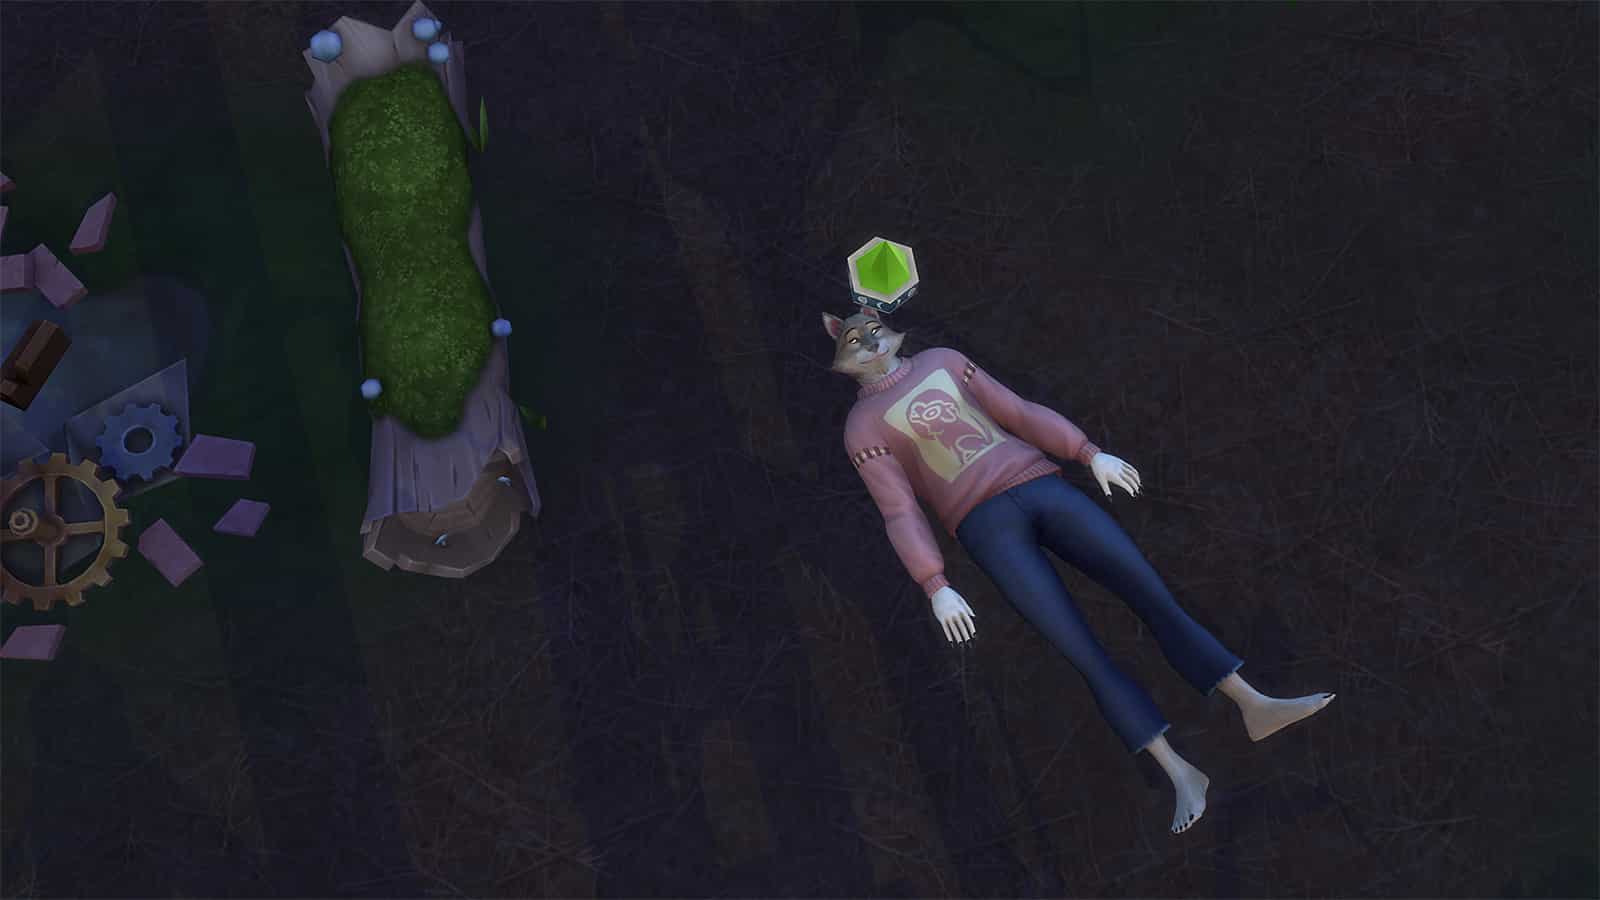 An image of s Werewolf in The Sims 4 moonbathing